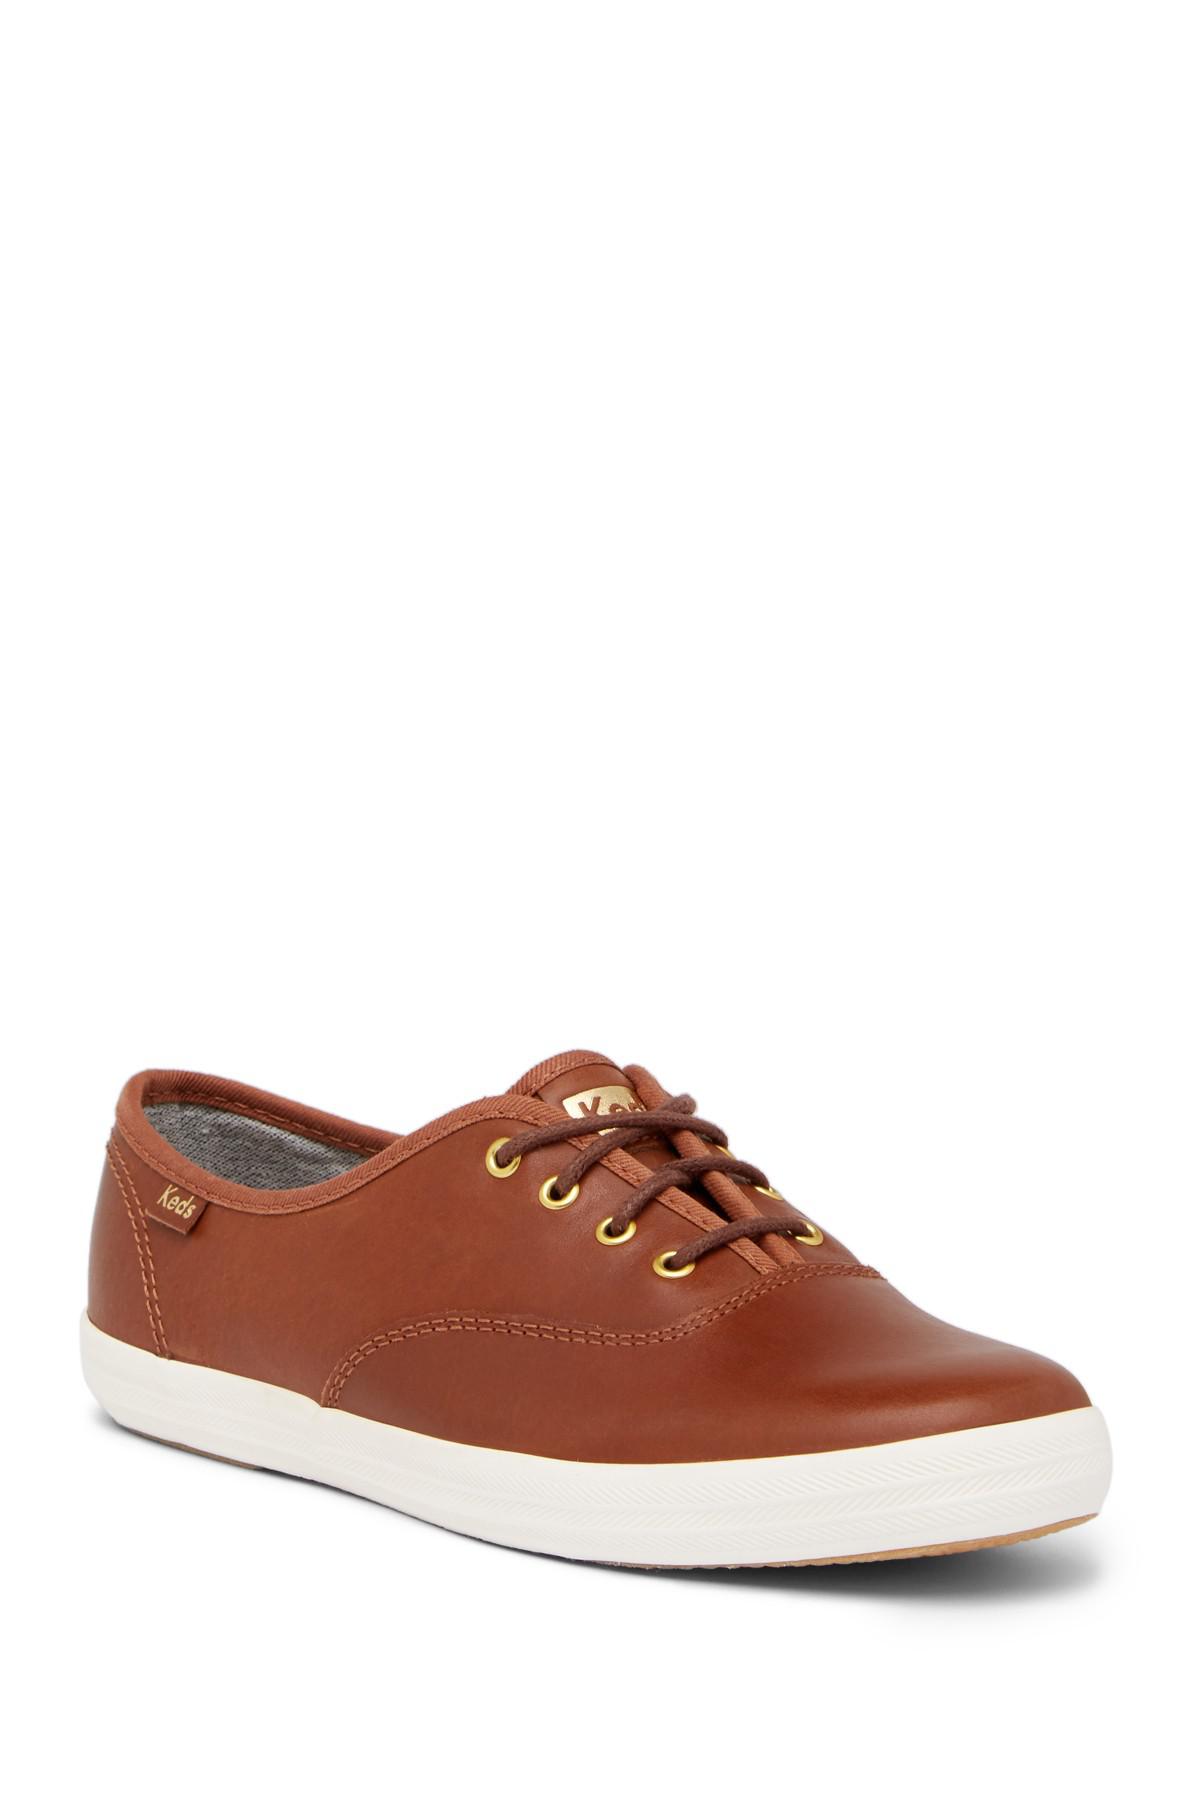 Keds Champion Leather Sneaker in Brown | Lyst